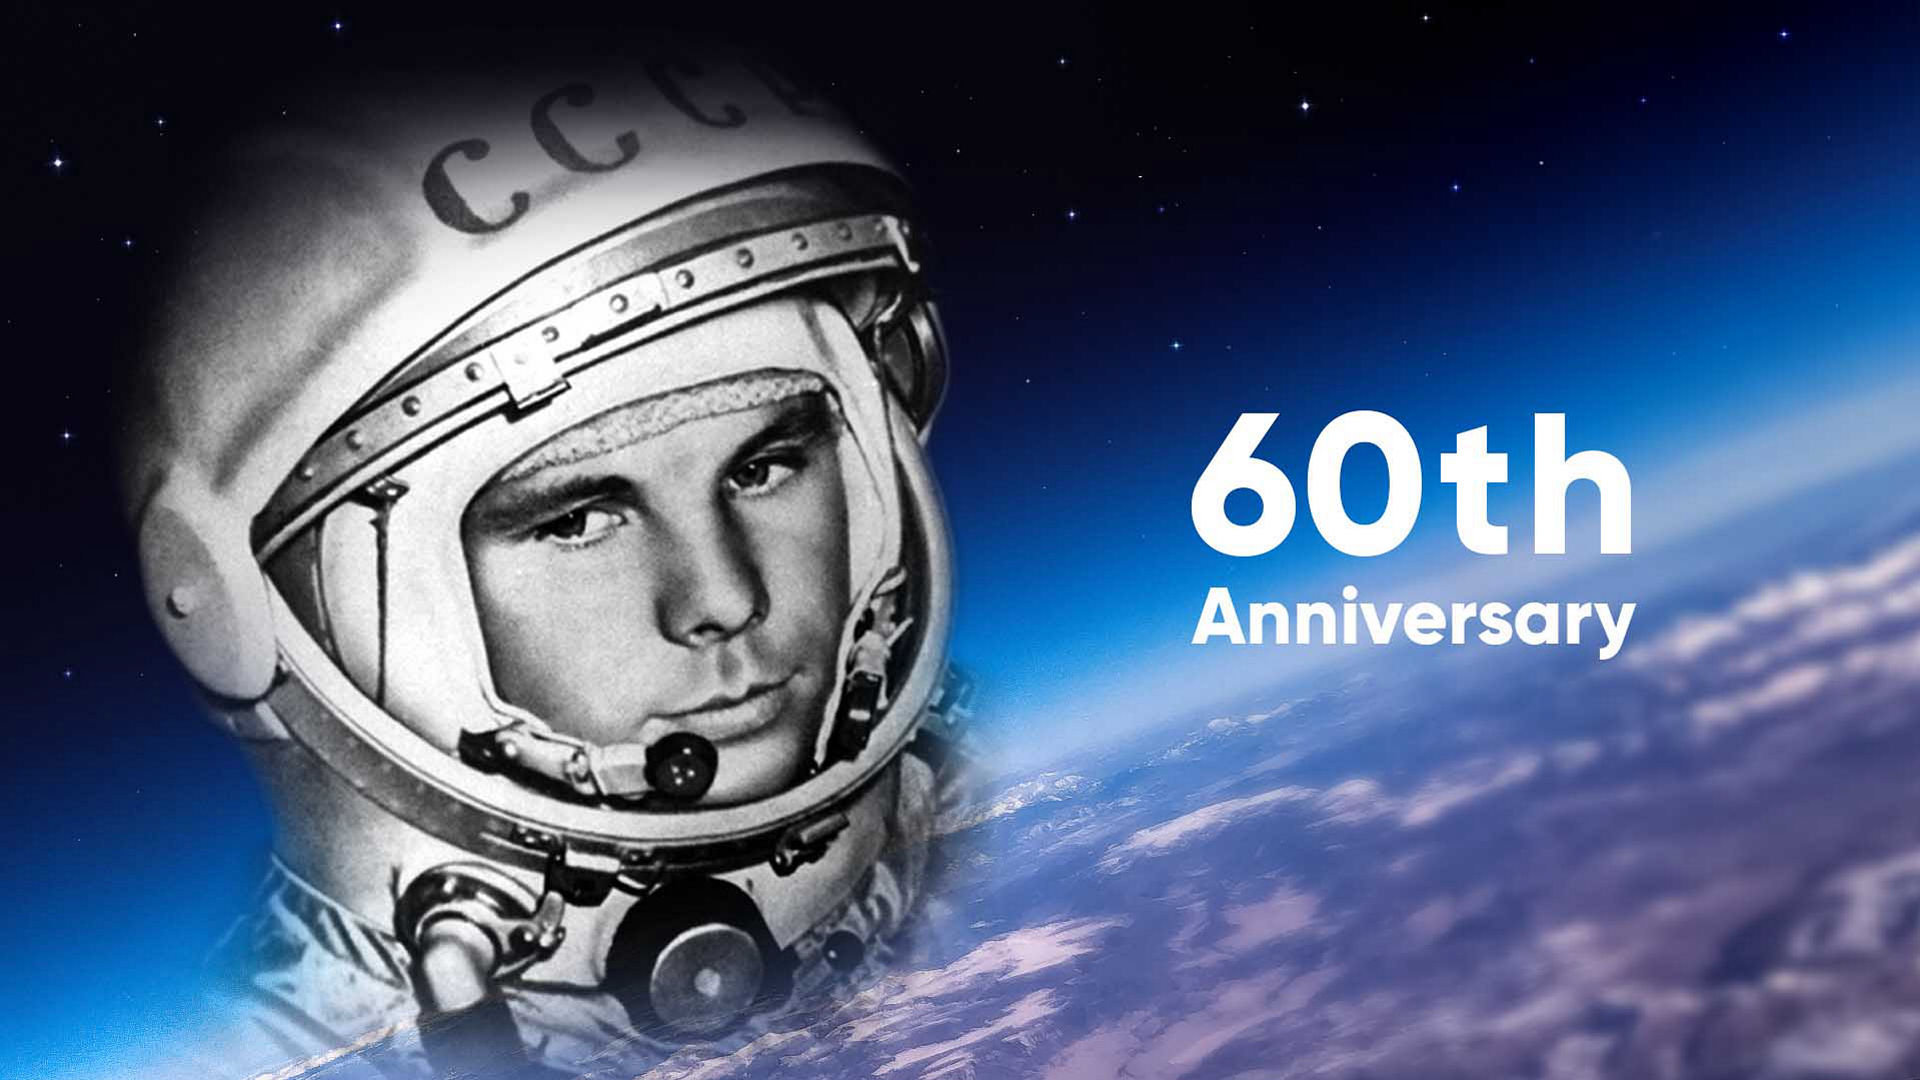 60th Anniversary of the First Human Space Flight